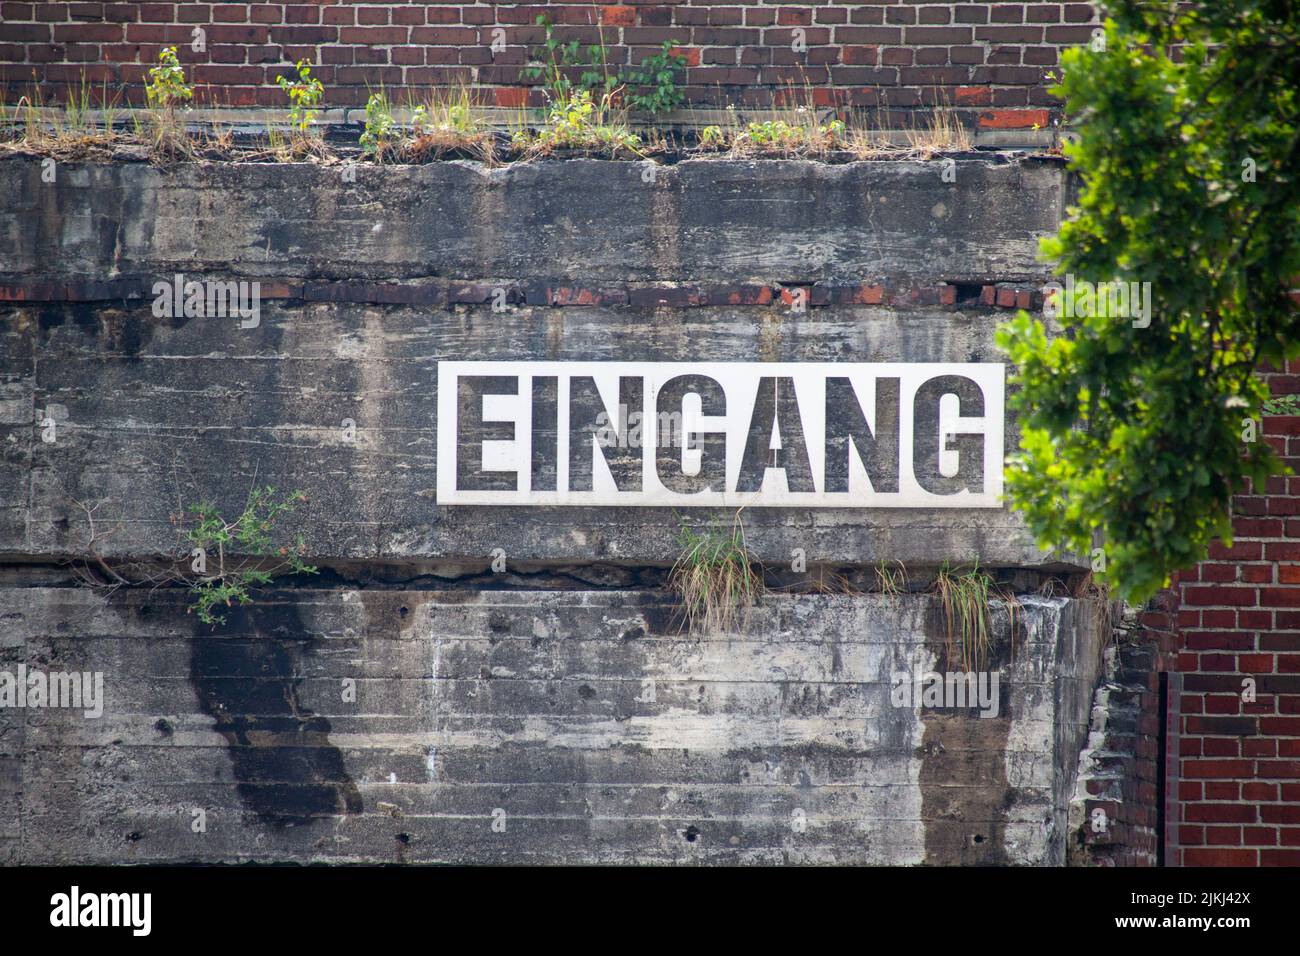 A closeup shot of a bunker with a large sign saying entrance in German Stock Photo